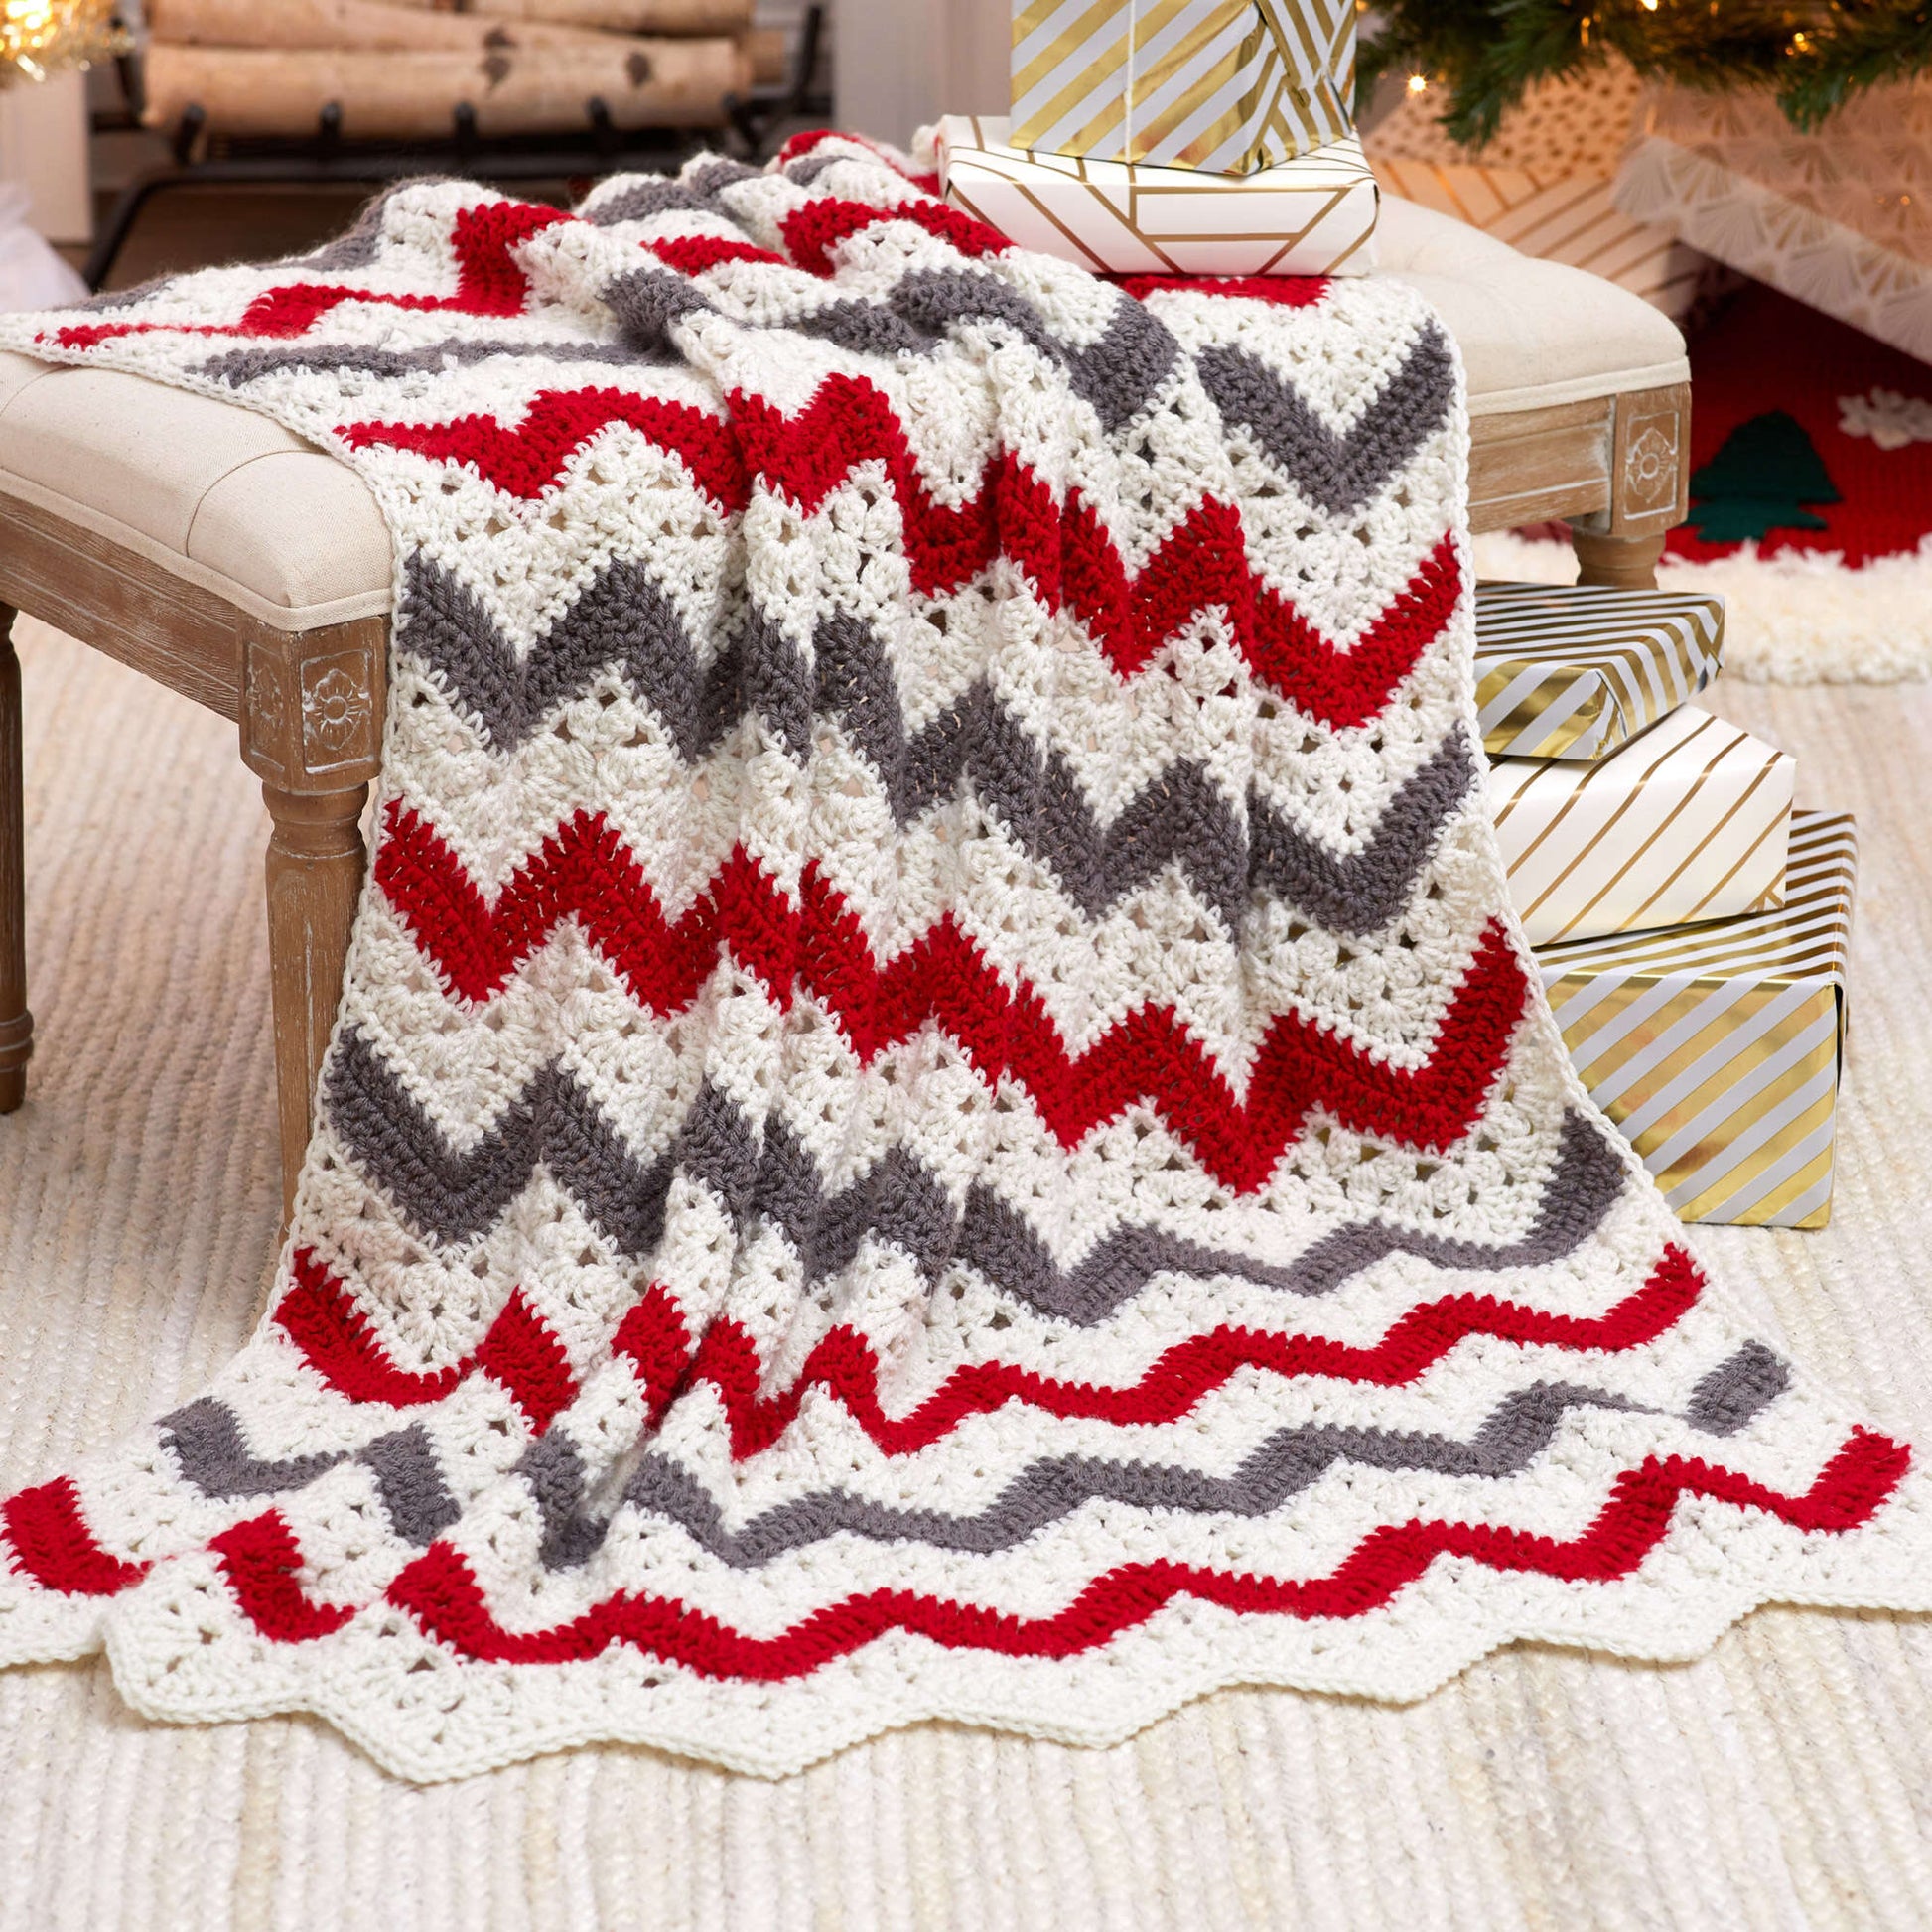 Free Red Heart Holiday Ripple Throw ( designer dispute, pattern taken down as per ally's note ) Crochet Pattern